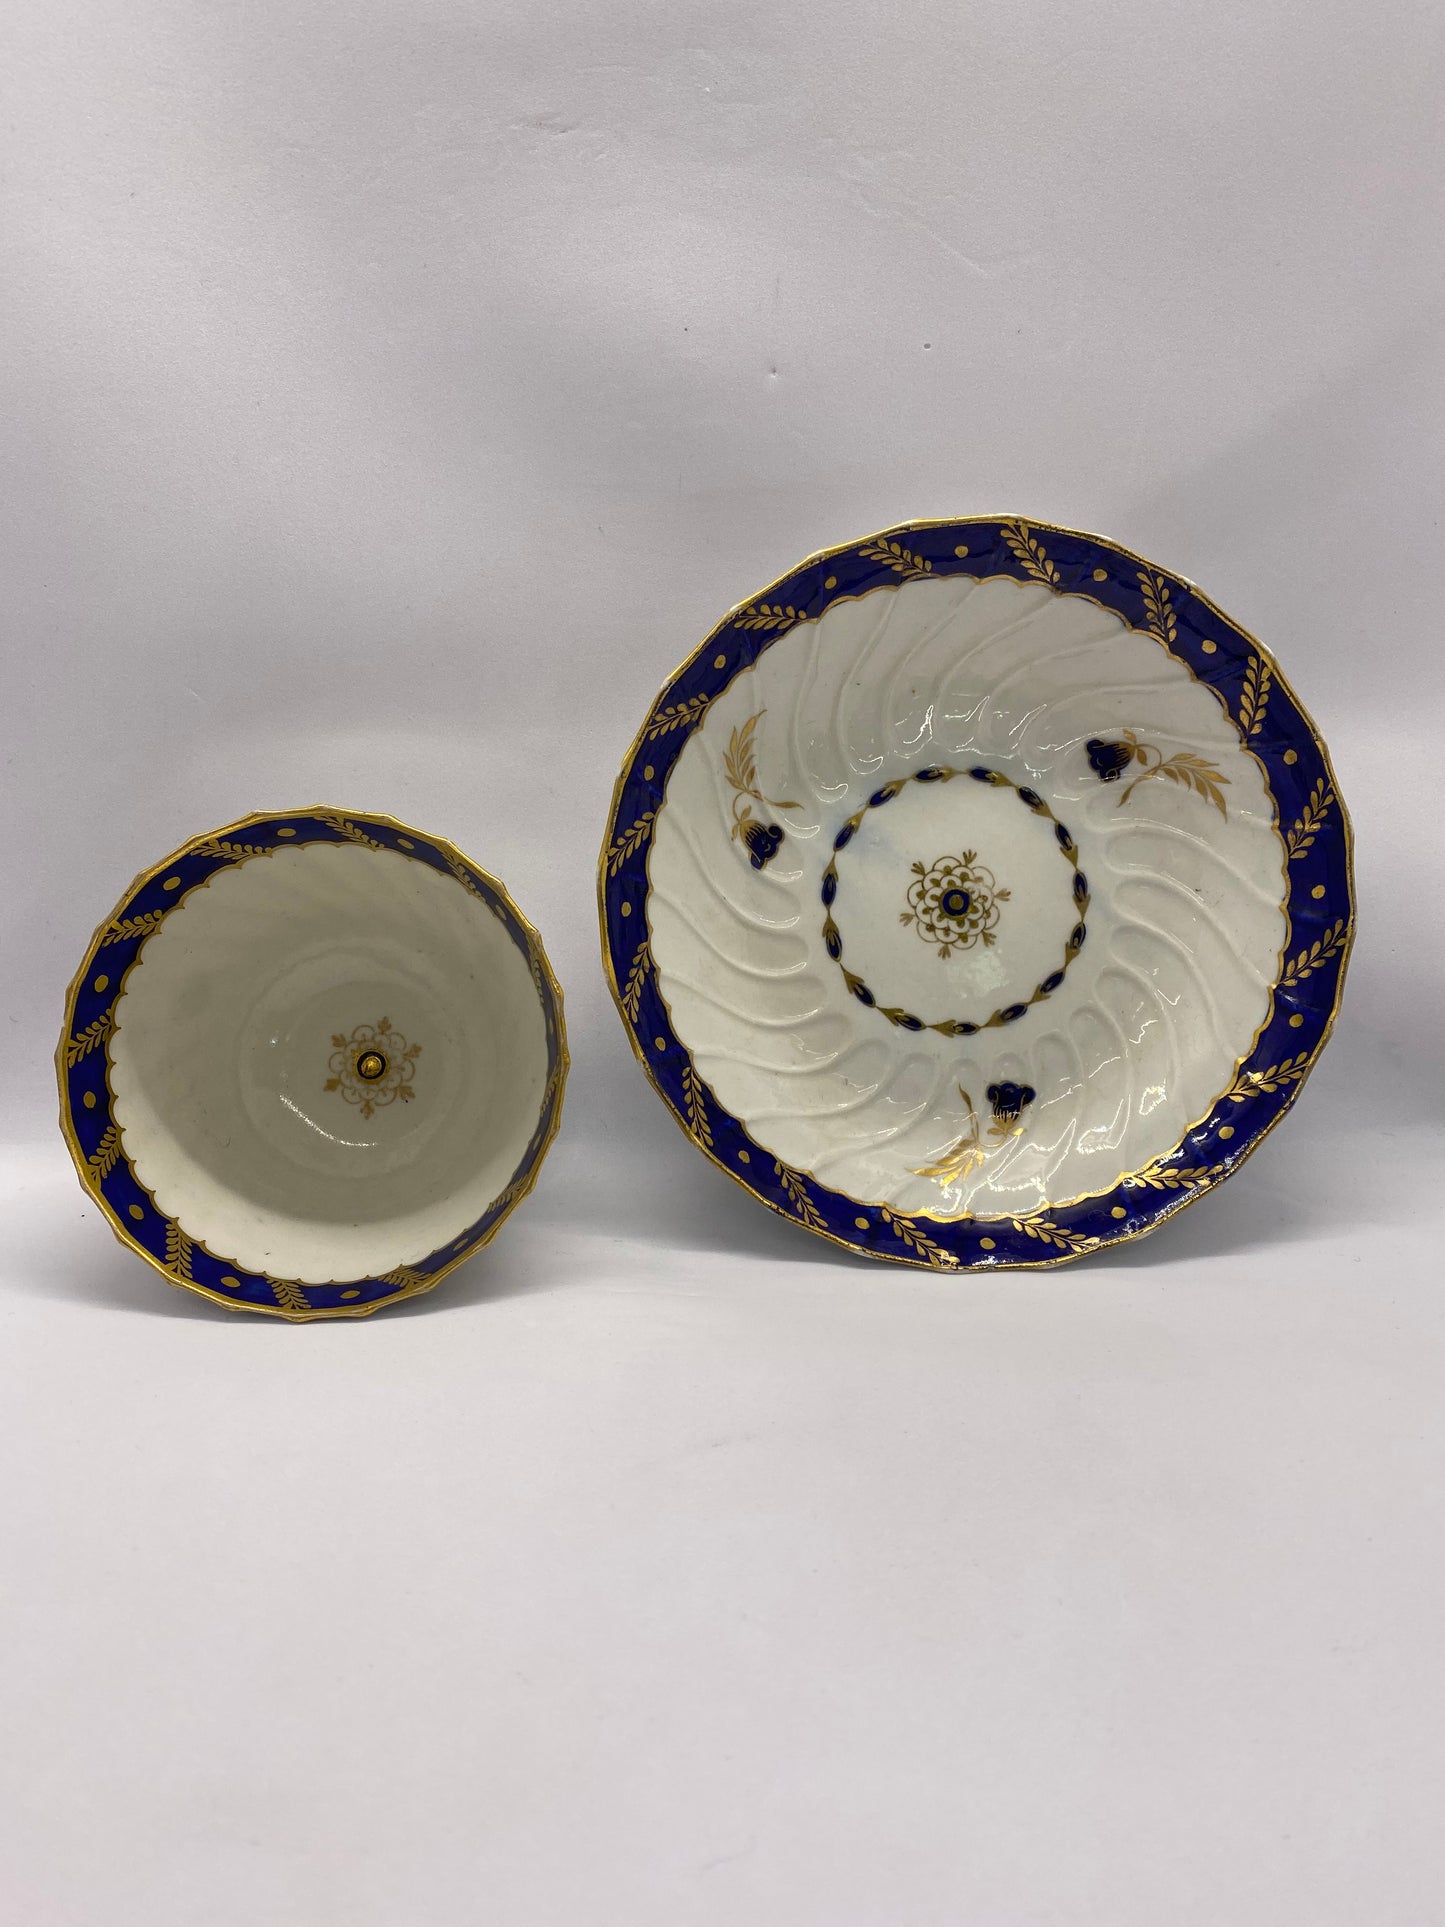 Late 18th Century Worcester Porcelain Regency Period Tea Bowl and Saucer Set (Flight Period)